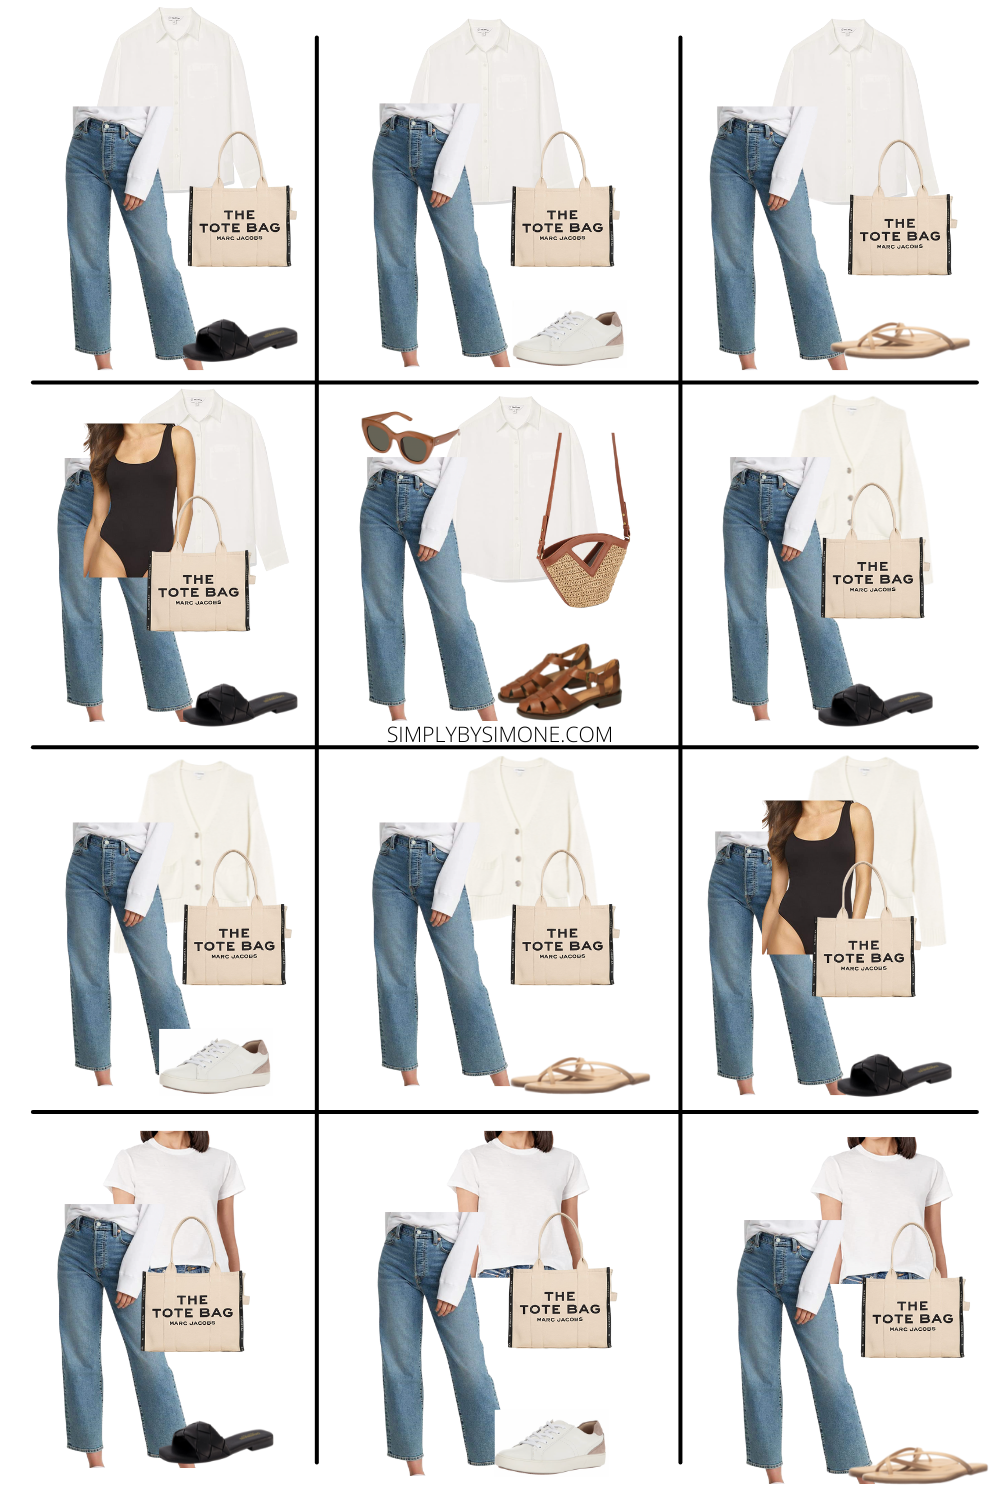 Affordable Amazon Pre-Fall Capsule Wardrobe | 15 Pieces, 48 Outfits | How to Build a Capsule Wardrobe | Amazon Fall Clothes | Outfit Inspiration | 48 Pre-Fall Weather Outfit Ideas | Fall Vacation Packing Guide | Amazon Pre-Fall Capsule Wardrobe - What To Wear This Fall 2022 | Parisian Outfit Ideas | Looks 1-12 | Simply by Simone